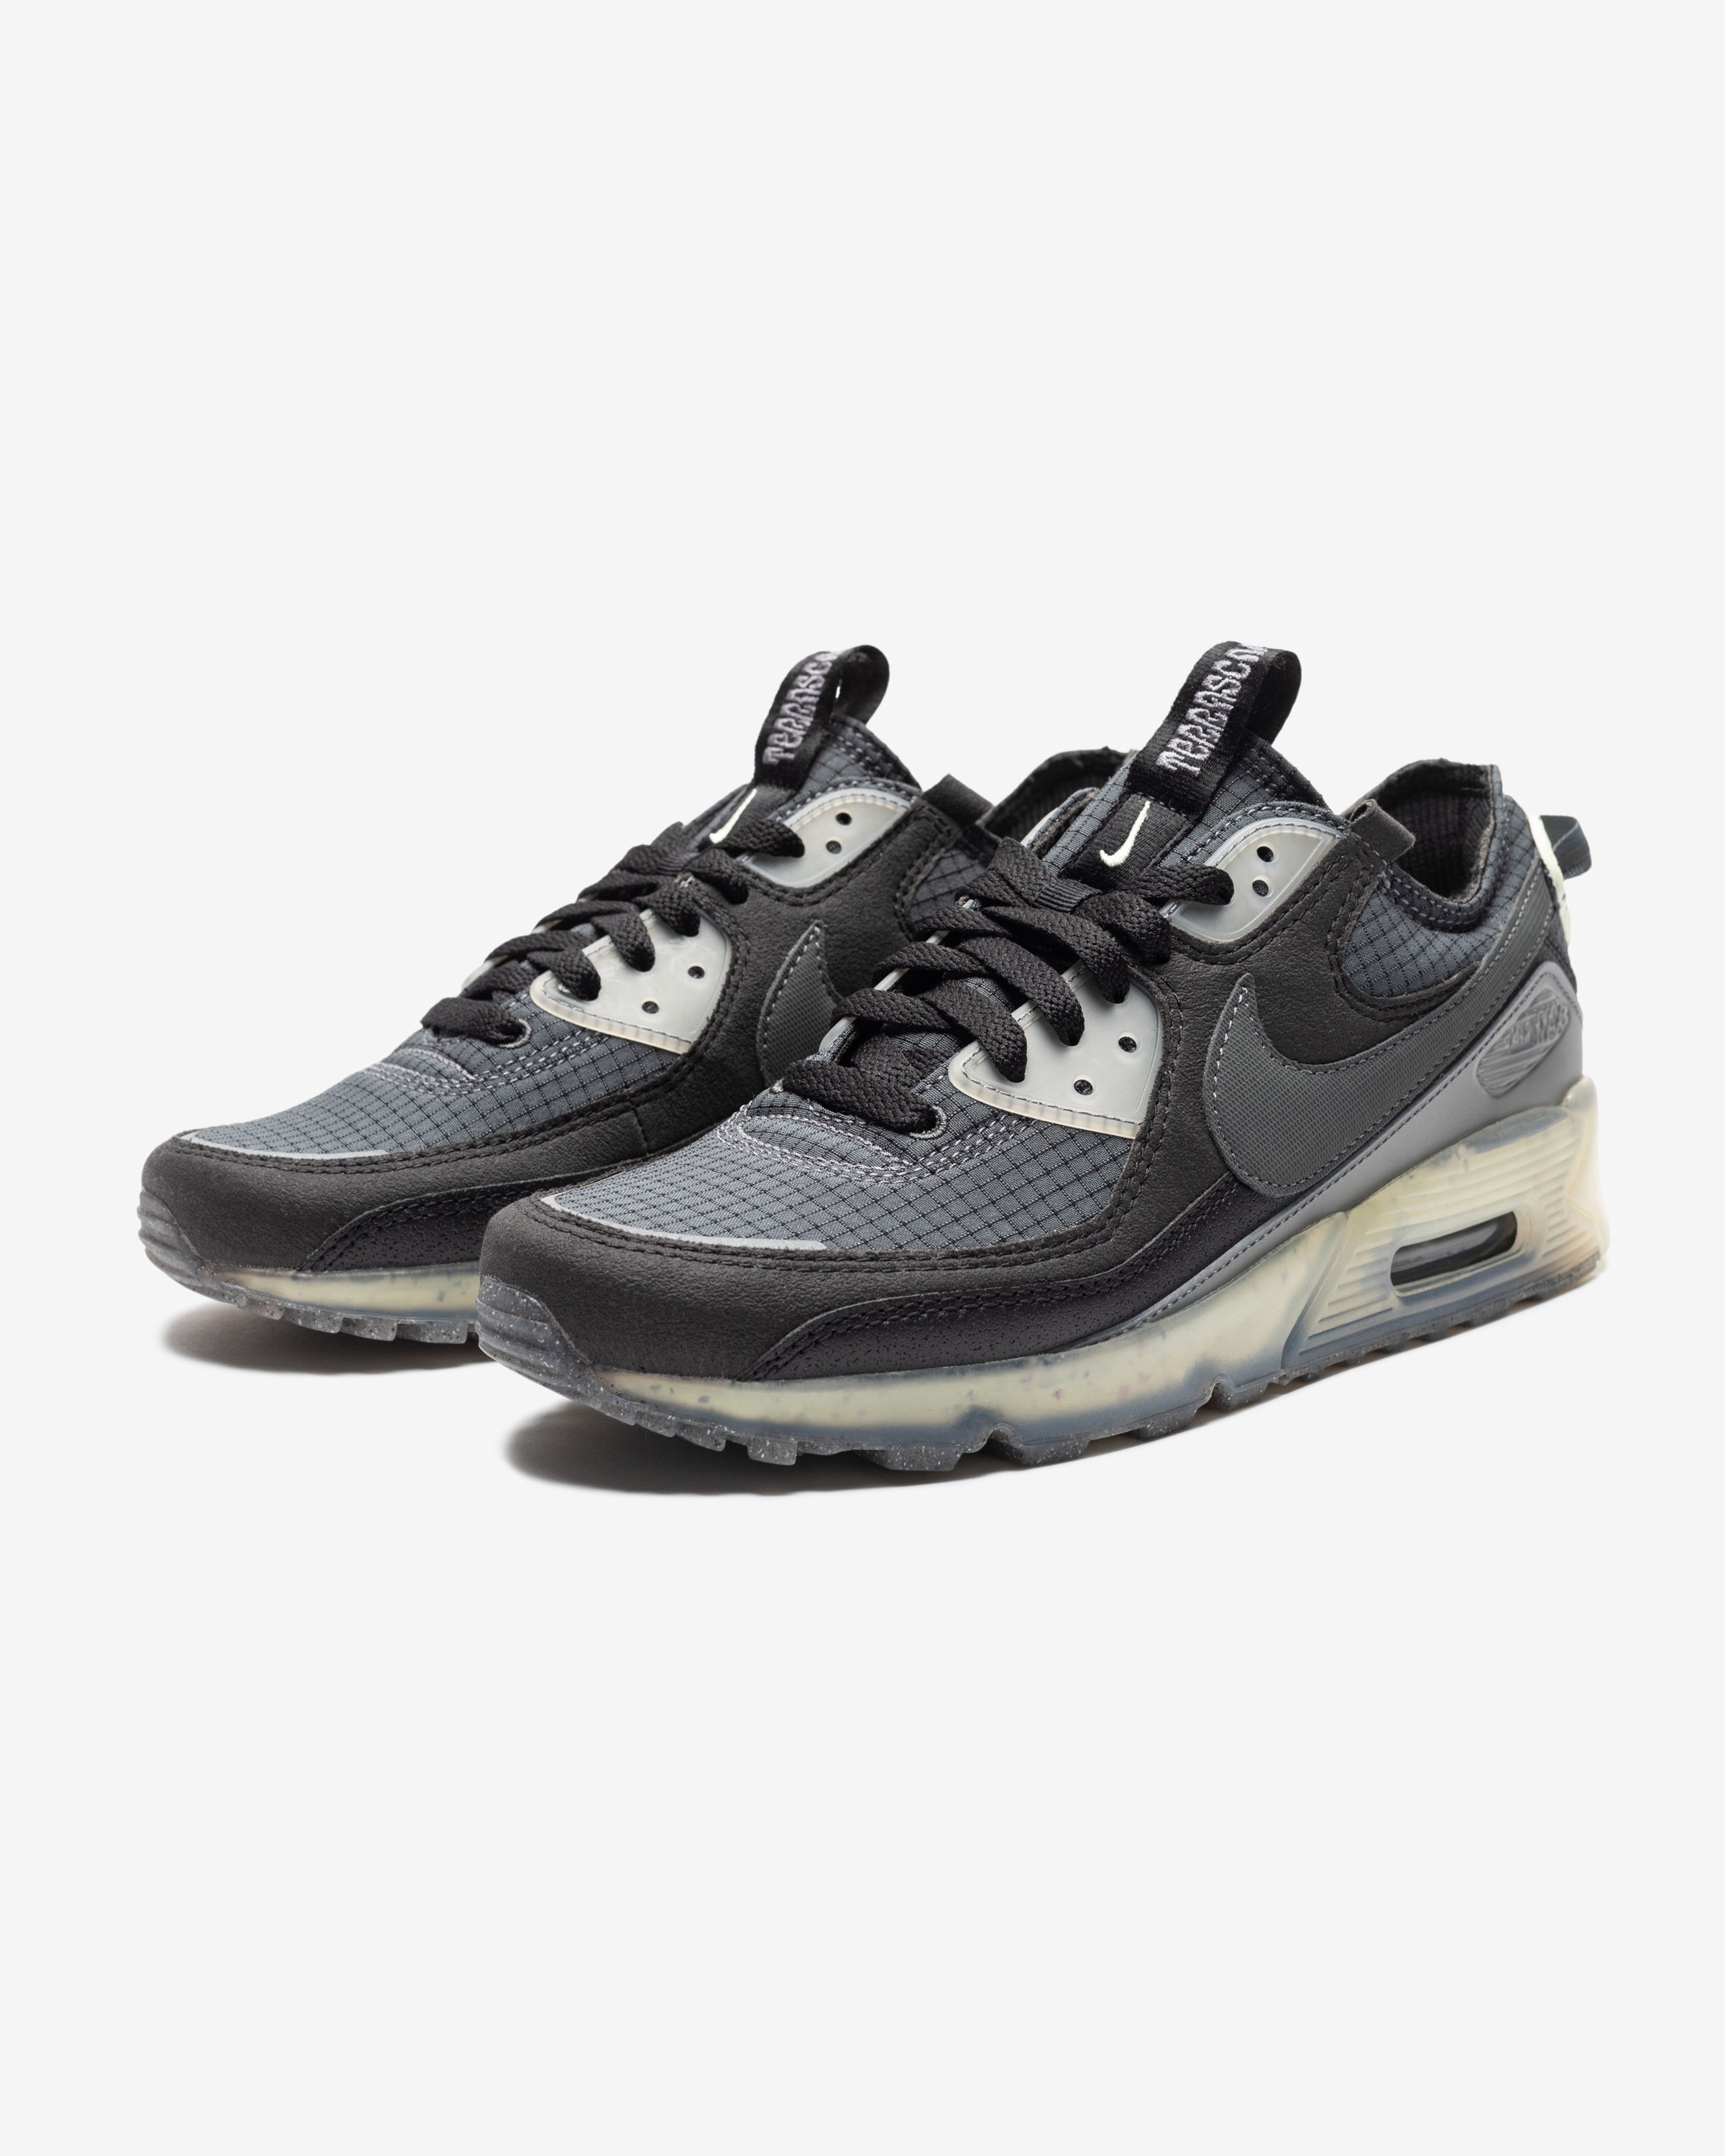 NIKE AIR MAX TERRASCAPE 90 - BLACK/ DARKGREY/ LIMEICE – Undefeated